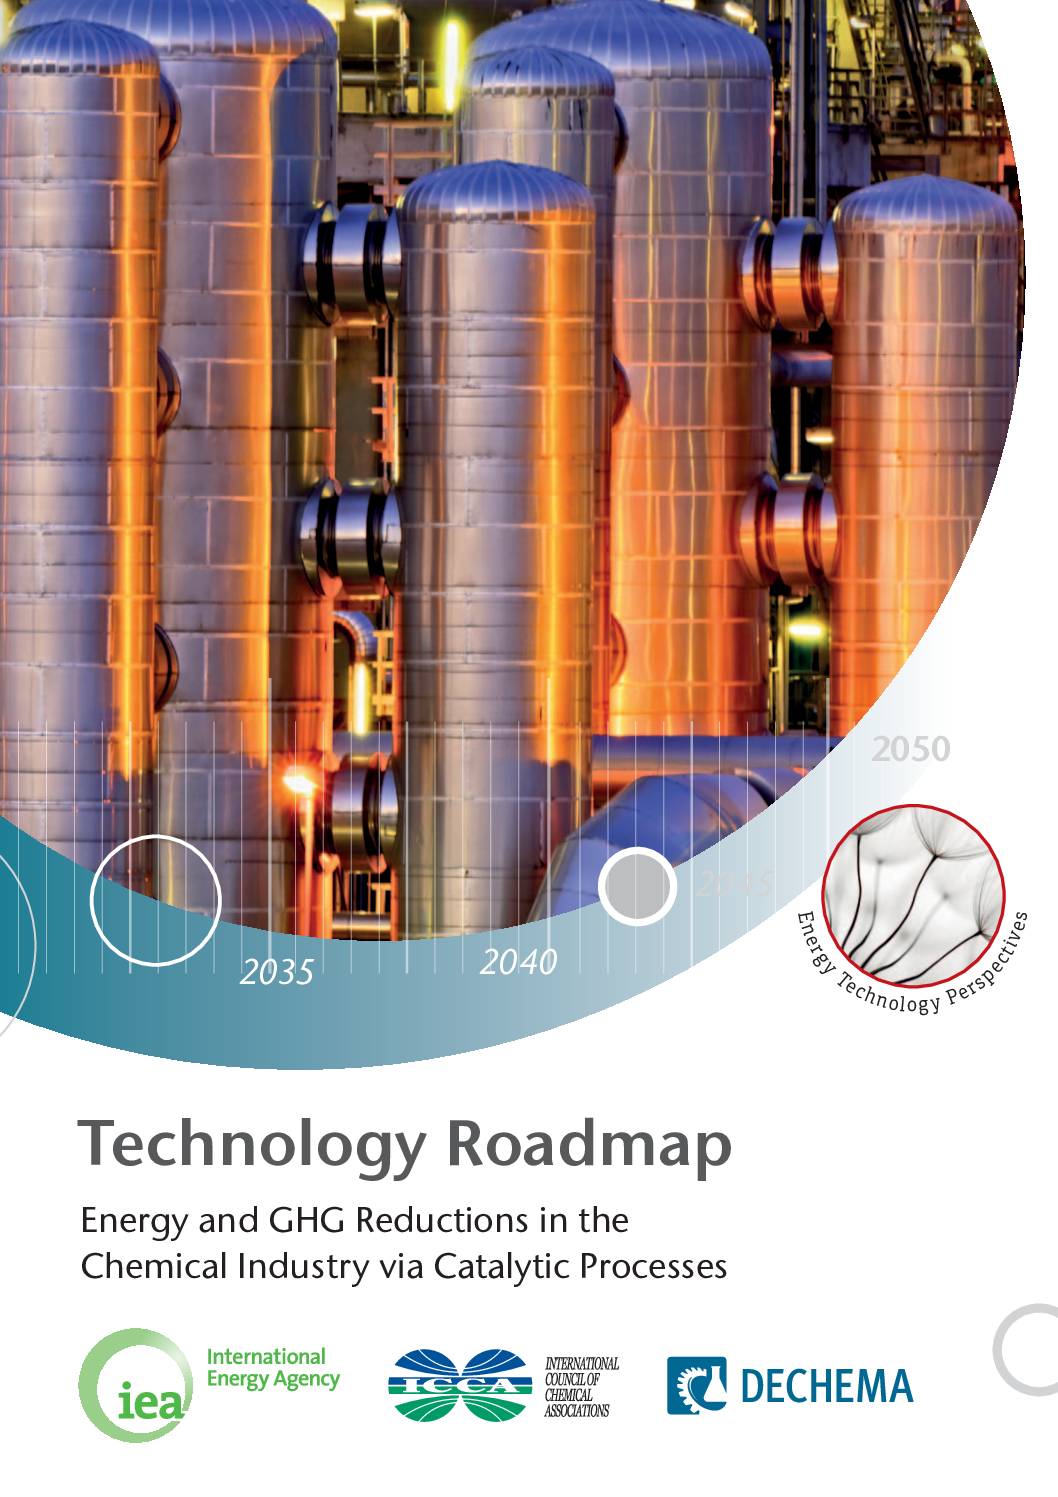 Technology Roadmap: Energy and GHG Reductions in the Chemical Industry via Catalytic Processes